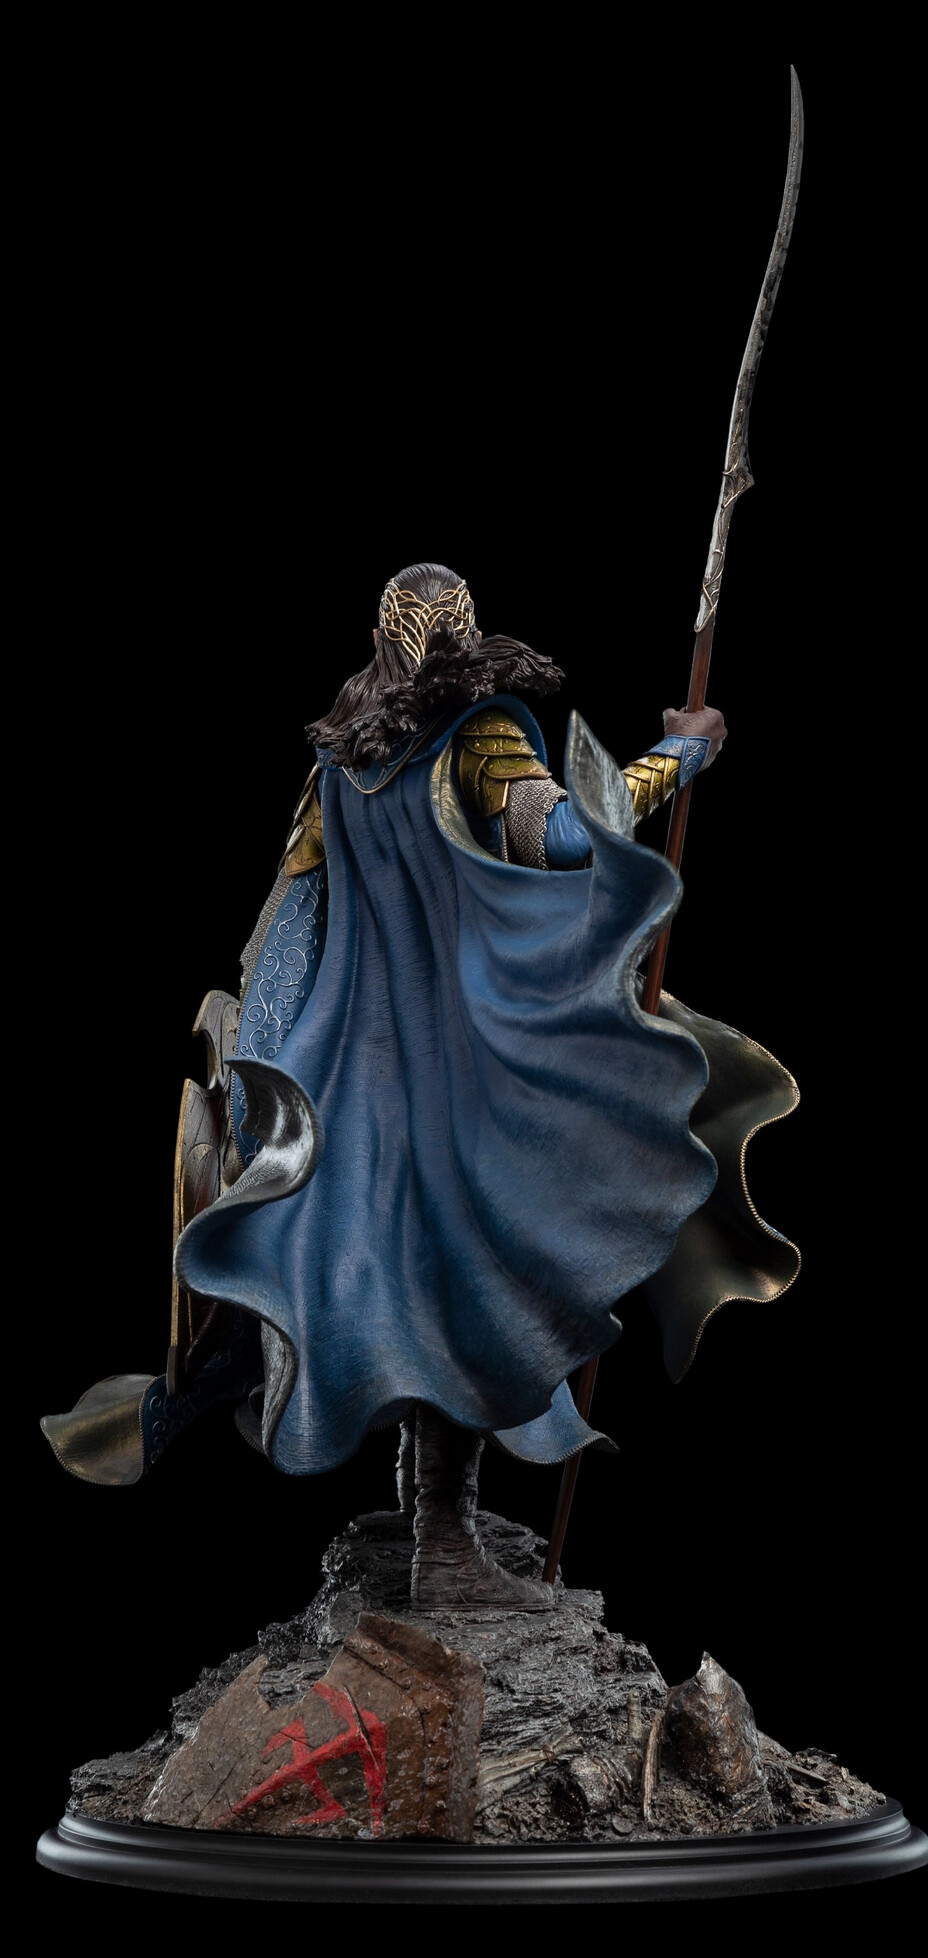 Wētā Workshop - Striding out of the gloom beneath the Mountain of fire, our  Dark Lord reigns supreme with the One Ring in hand. Digitally sculpted by  Fabio Paiva, Sauron 1:6 scale